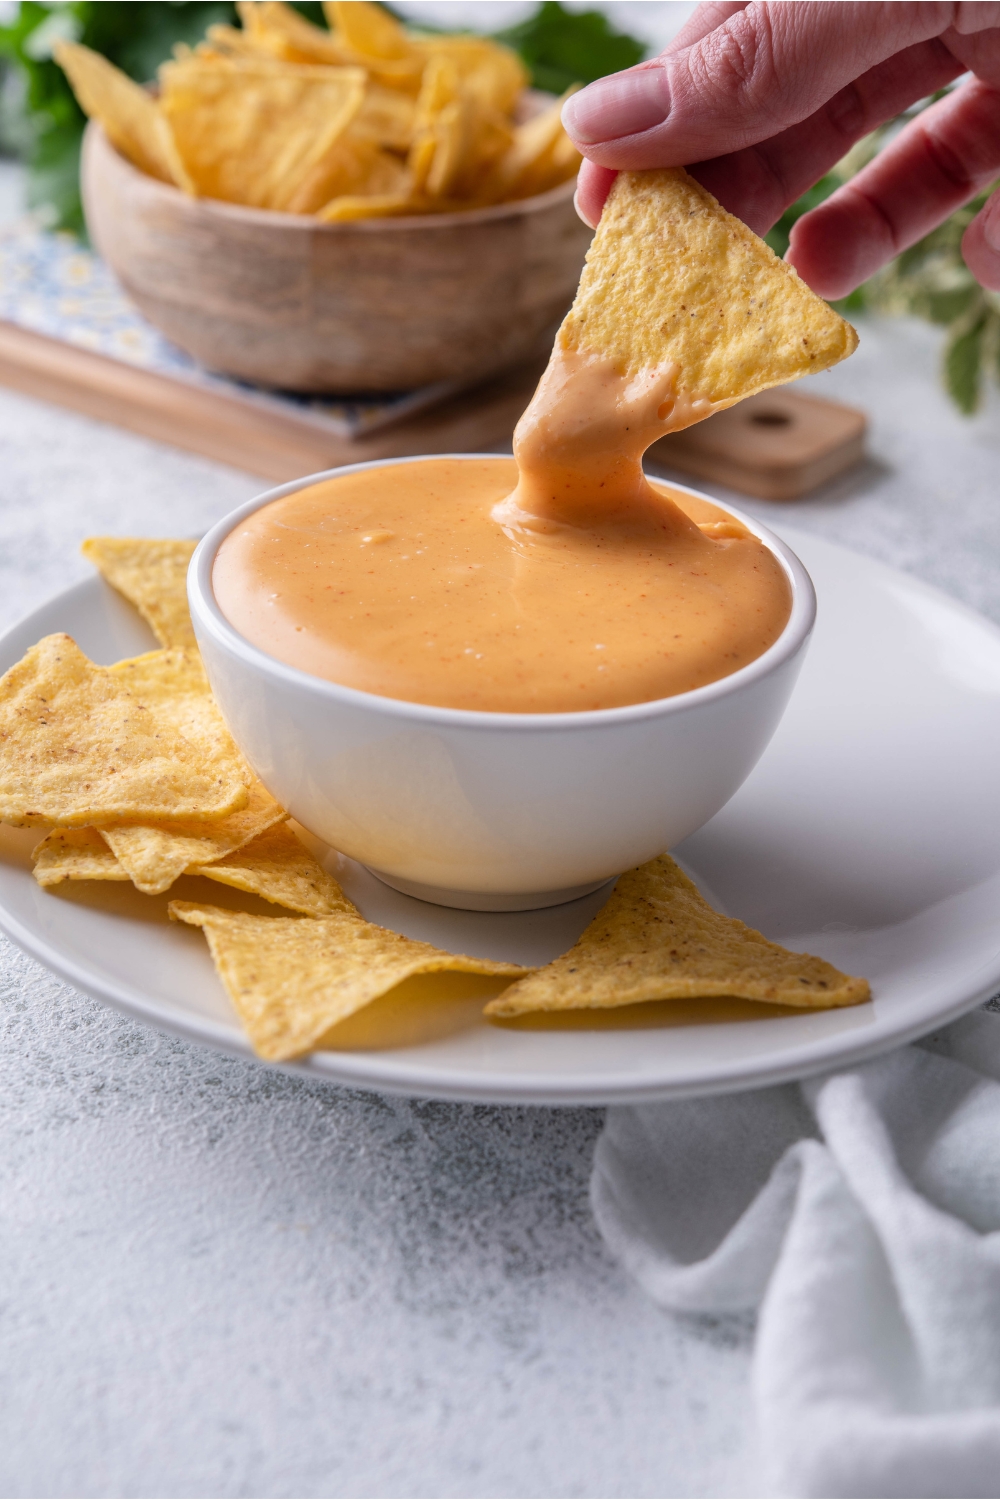 A hand dipping a tortilla chip into a bowl of Taco Bell nacho cheese sauce. The cheese sauce is in a white bowl atop a white plate filled with more tortilla chips.